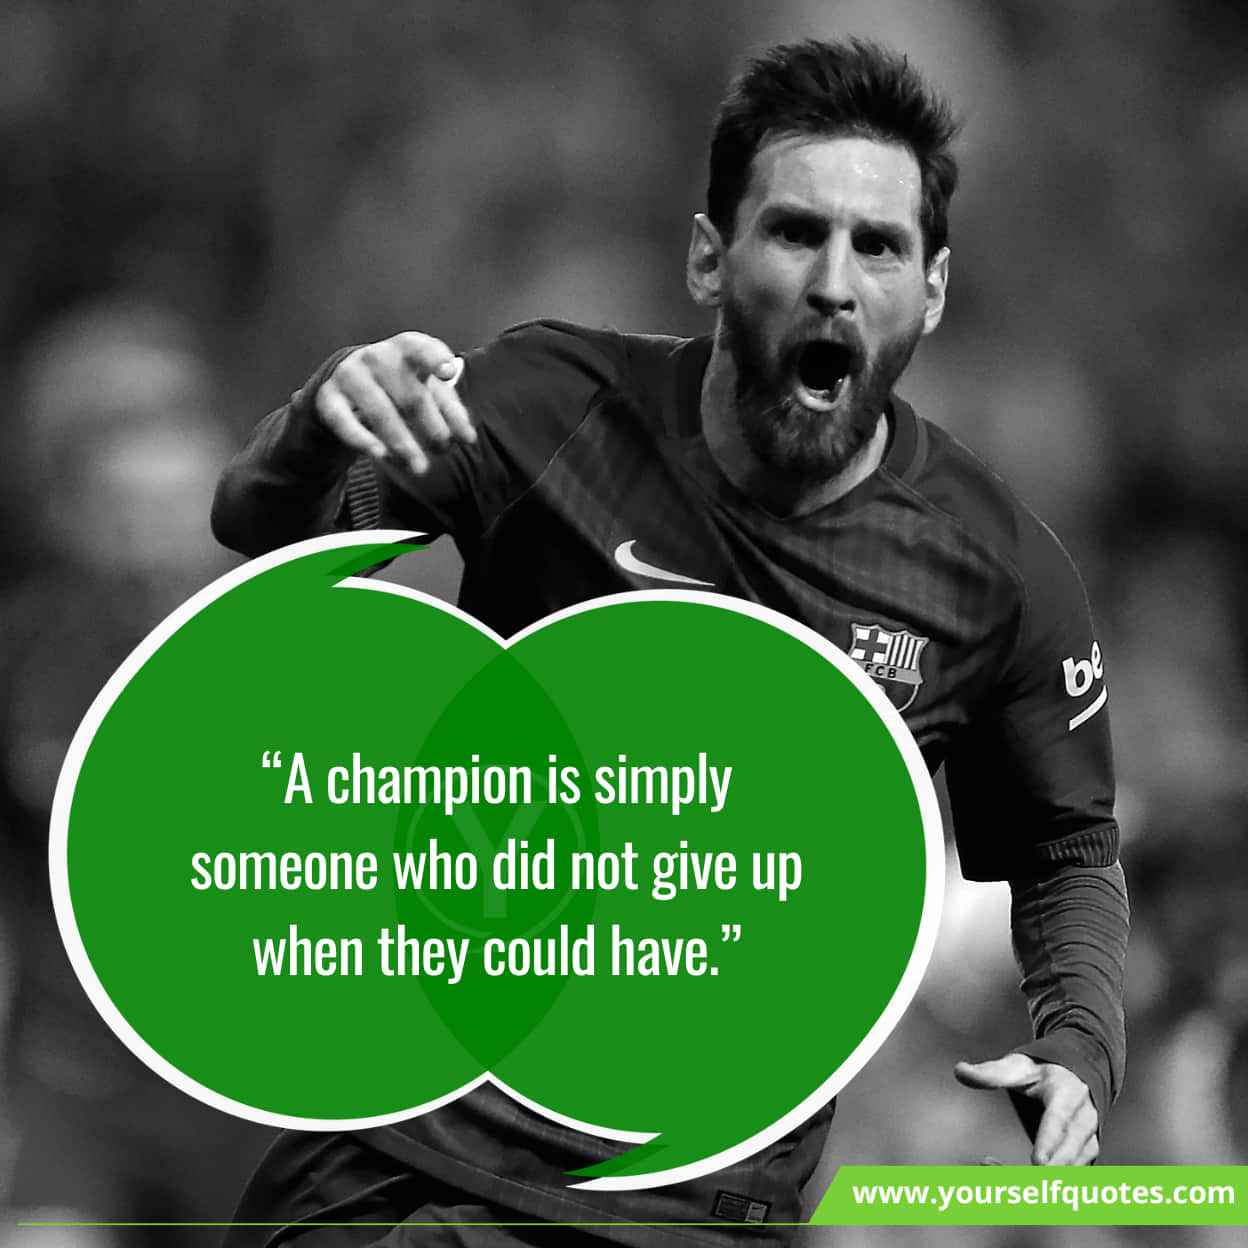 Inspiring Soccer Quotes And Sayings